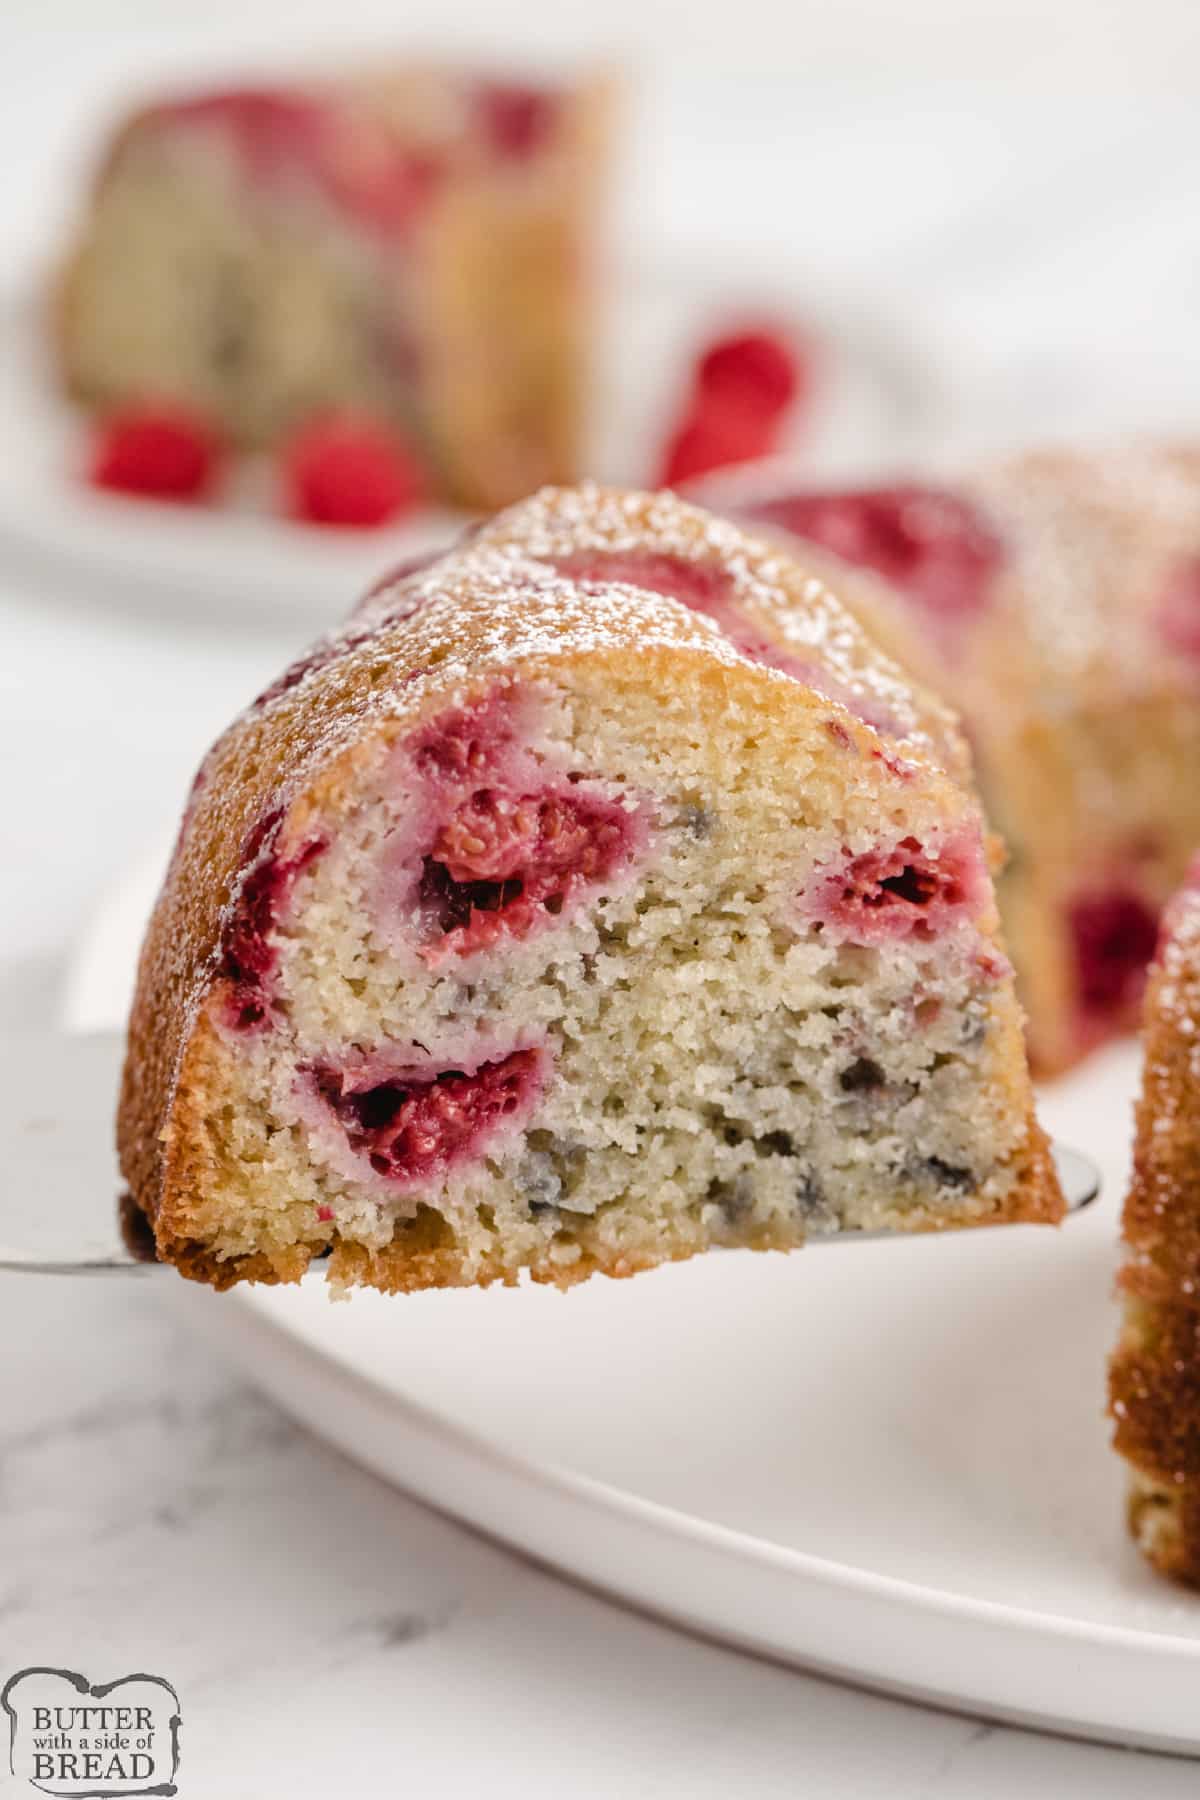 Delicious bundt cake made with fresh raspberries